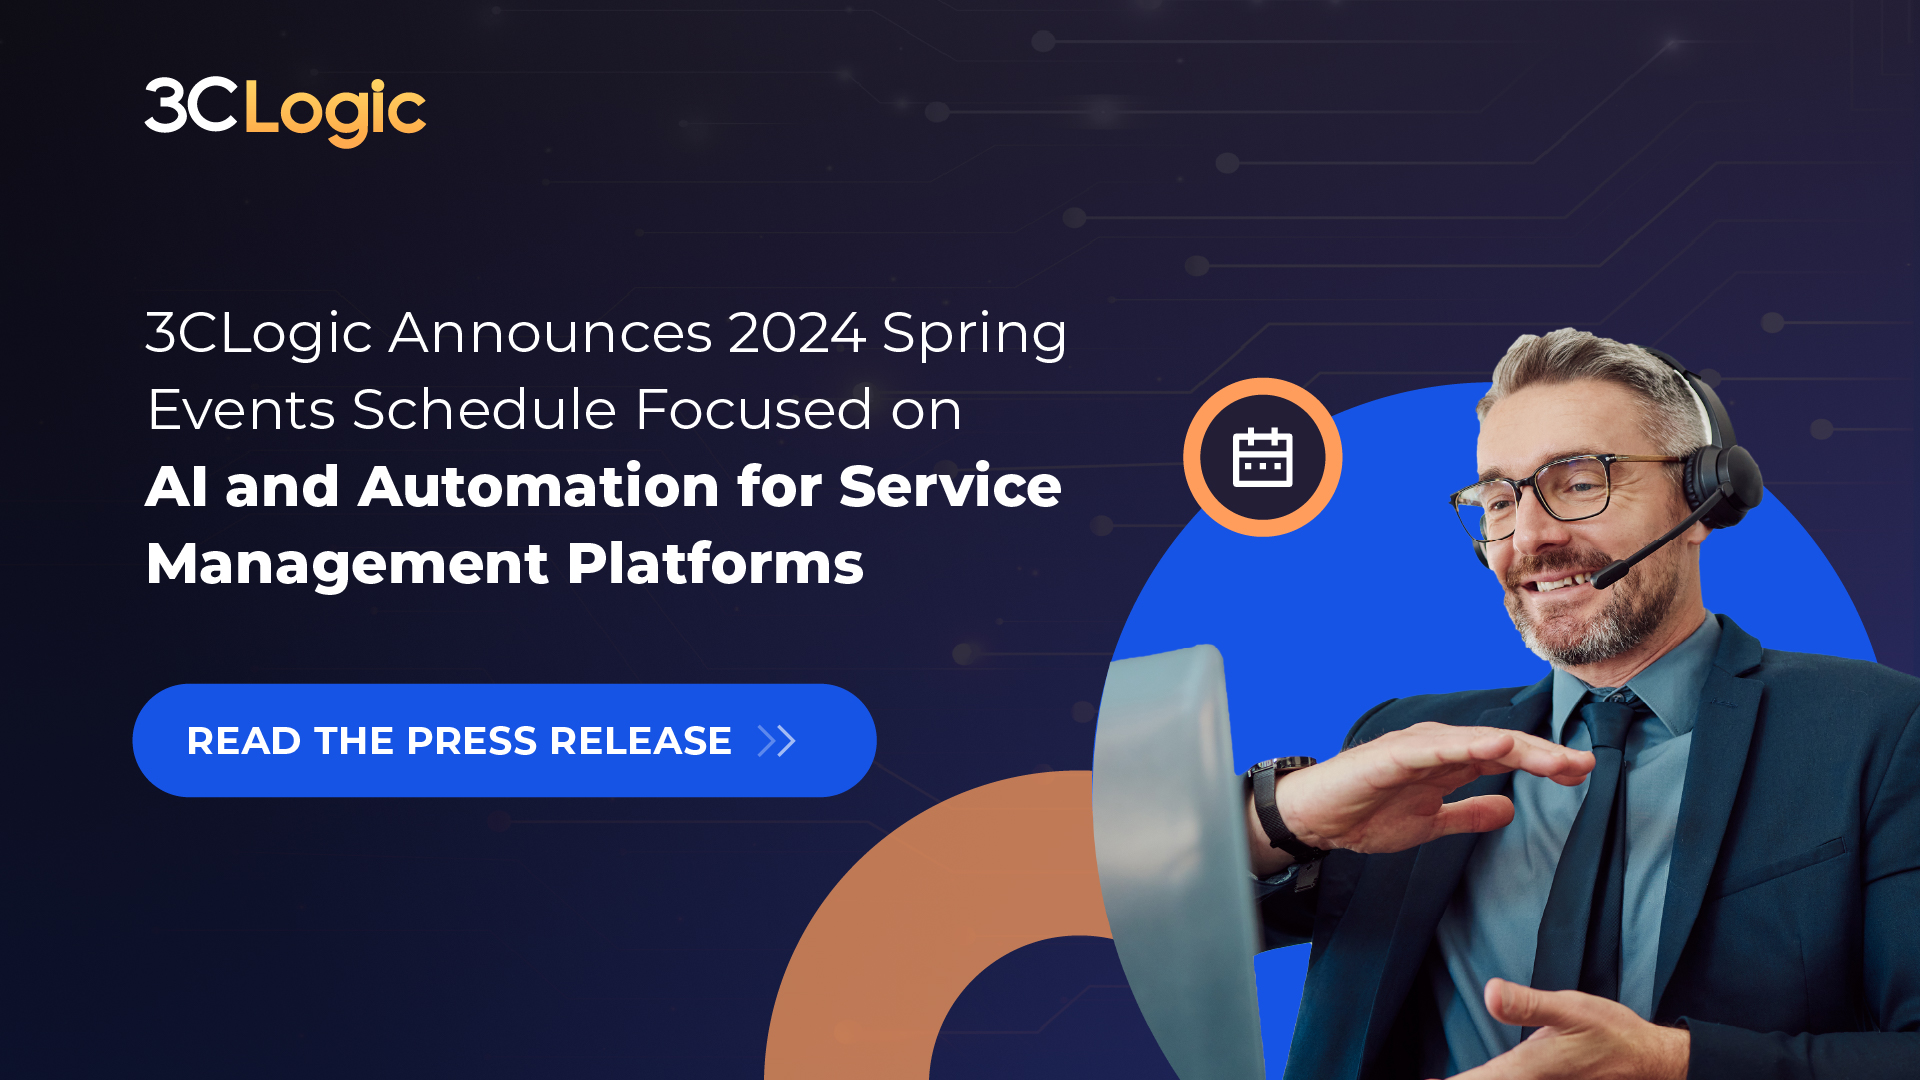 3CLogic Announces 2024 Spring Events Schedule Focused on AI and Automation for Service Management Platforms